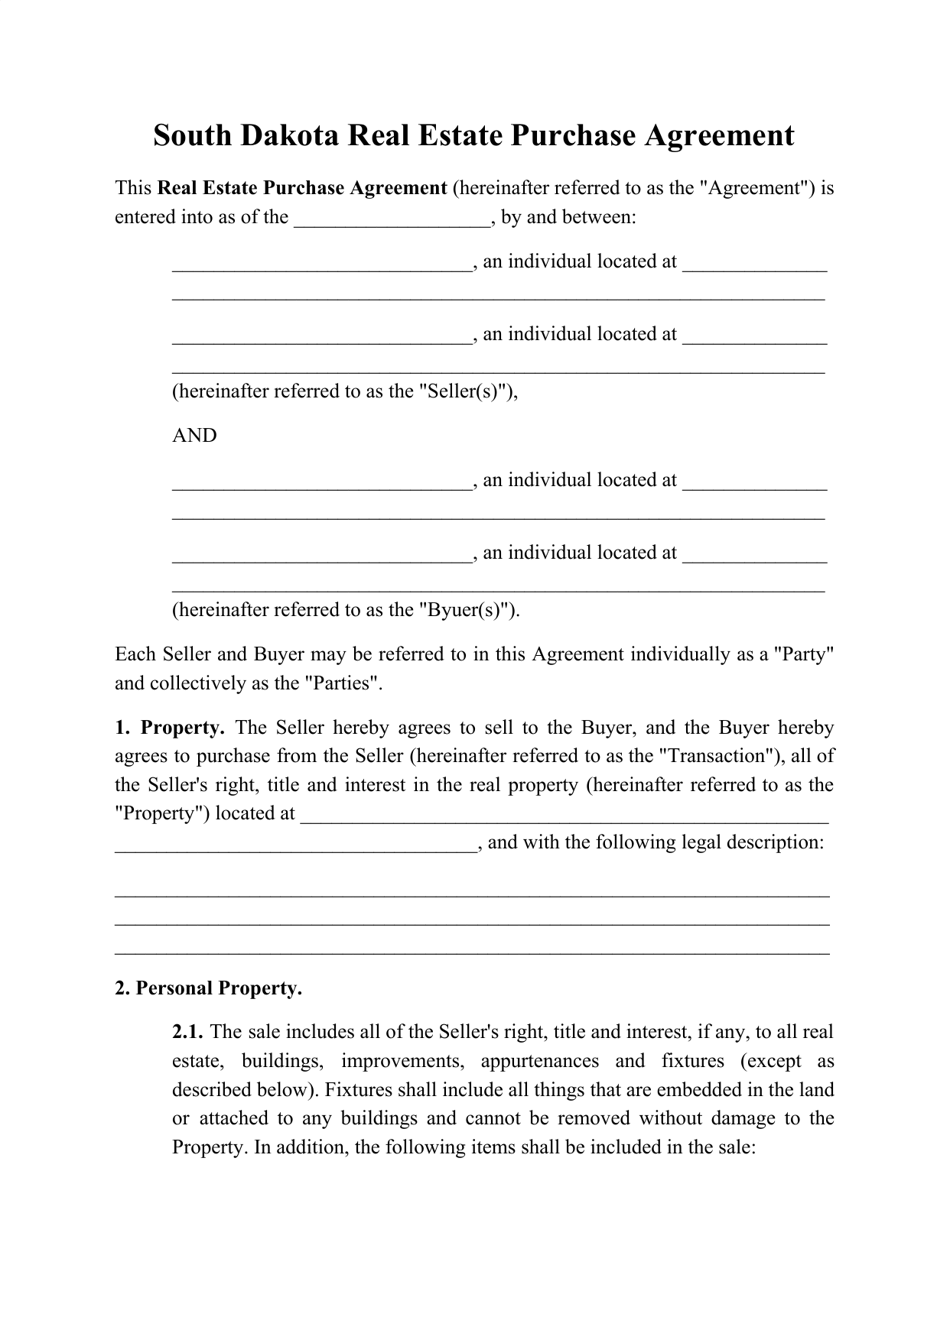 south-dakota-real-estate-purchase-agreement-template-fill-out-sign